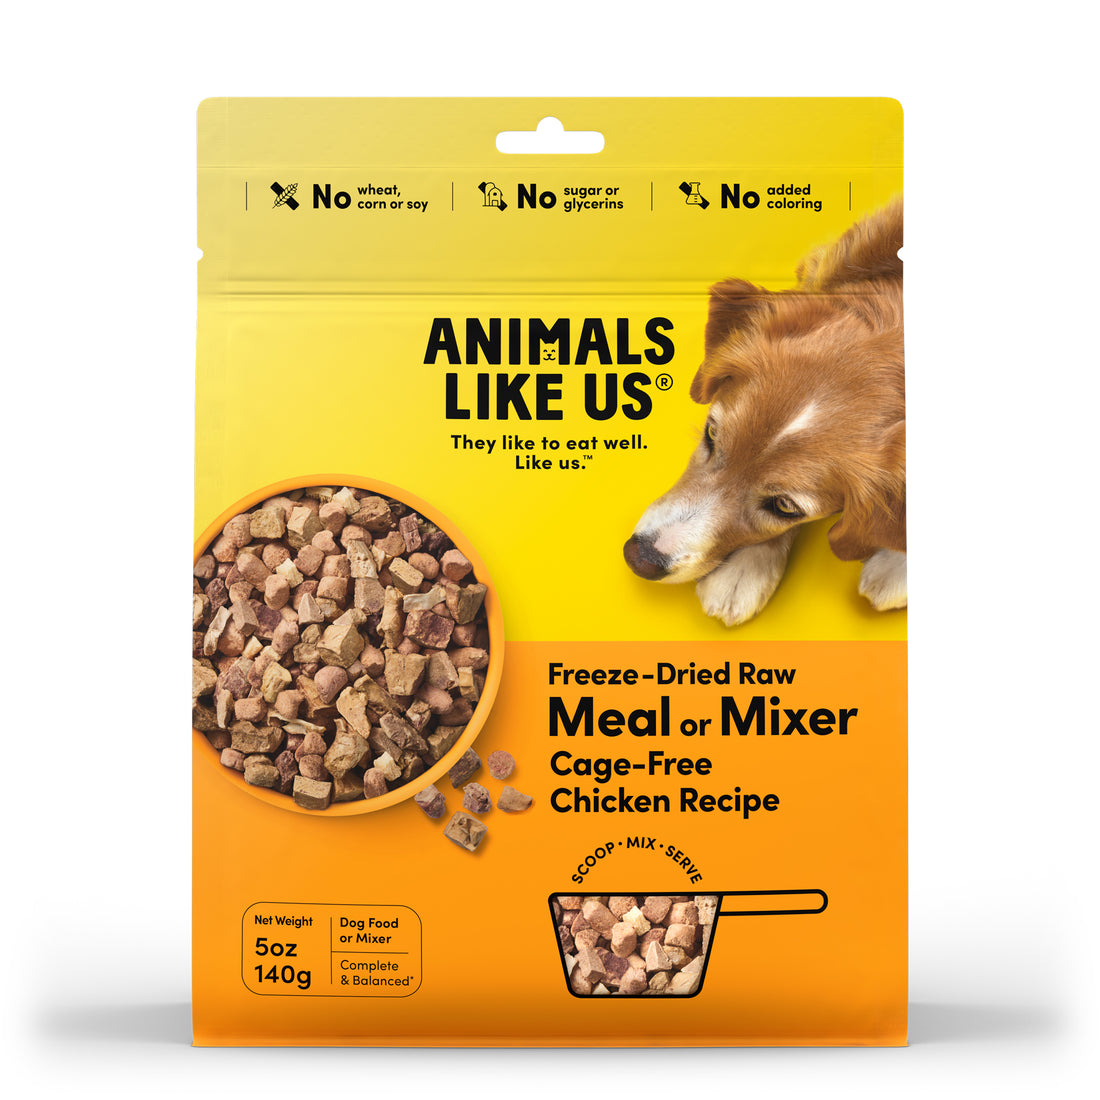 Animals Like Us Meal Mixer Cage-Free Chicken